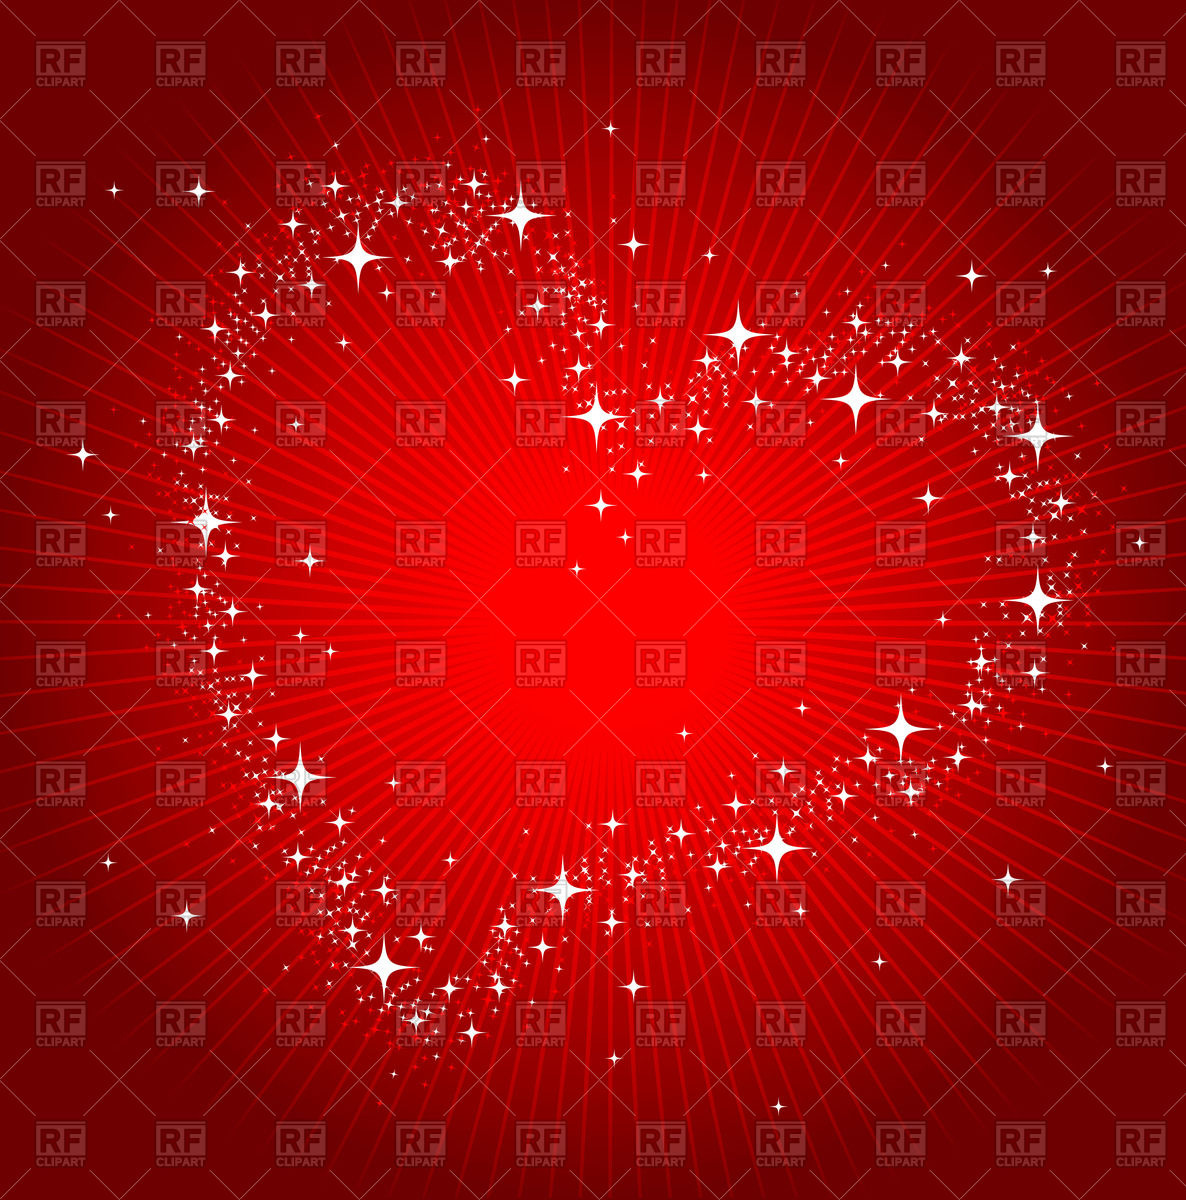 St  Valentine S Day Card   Outline Of Heart With Starry Border 58674